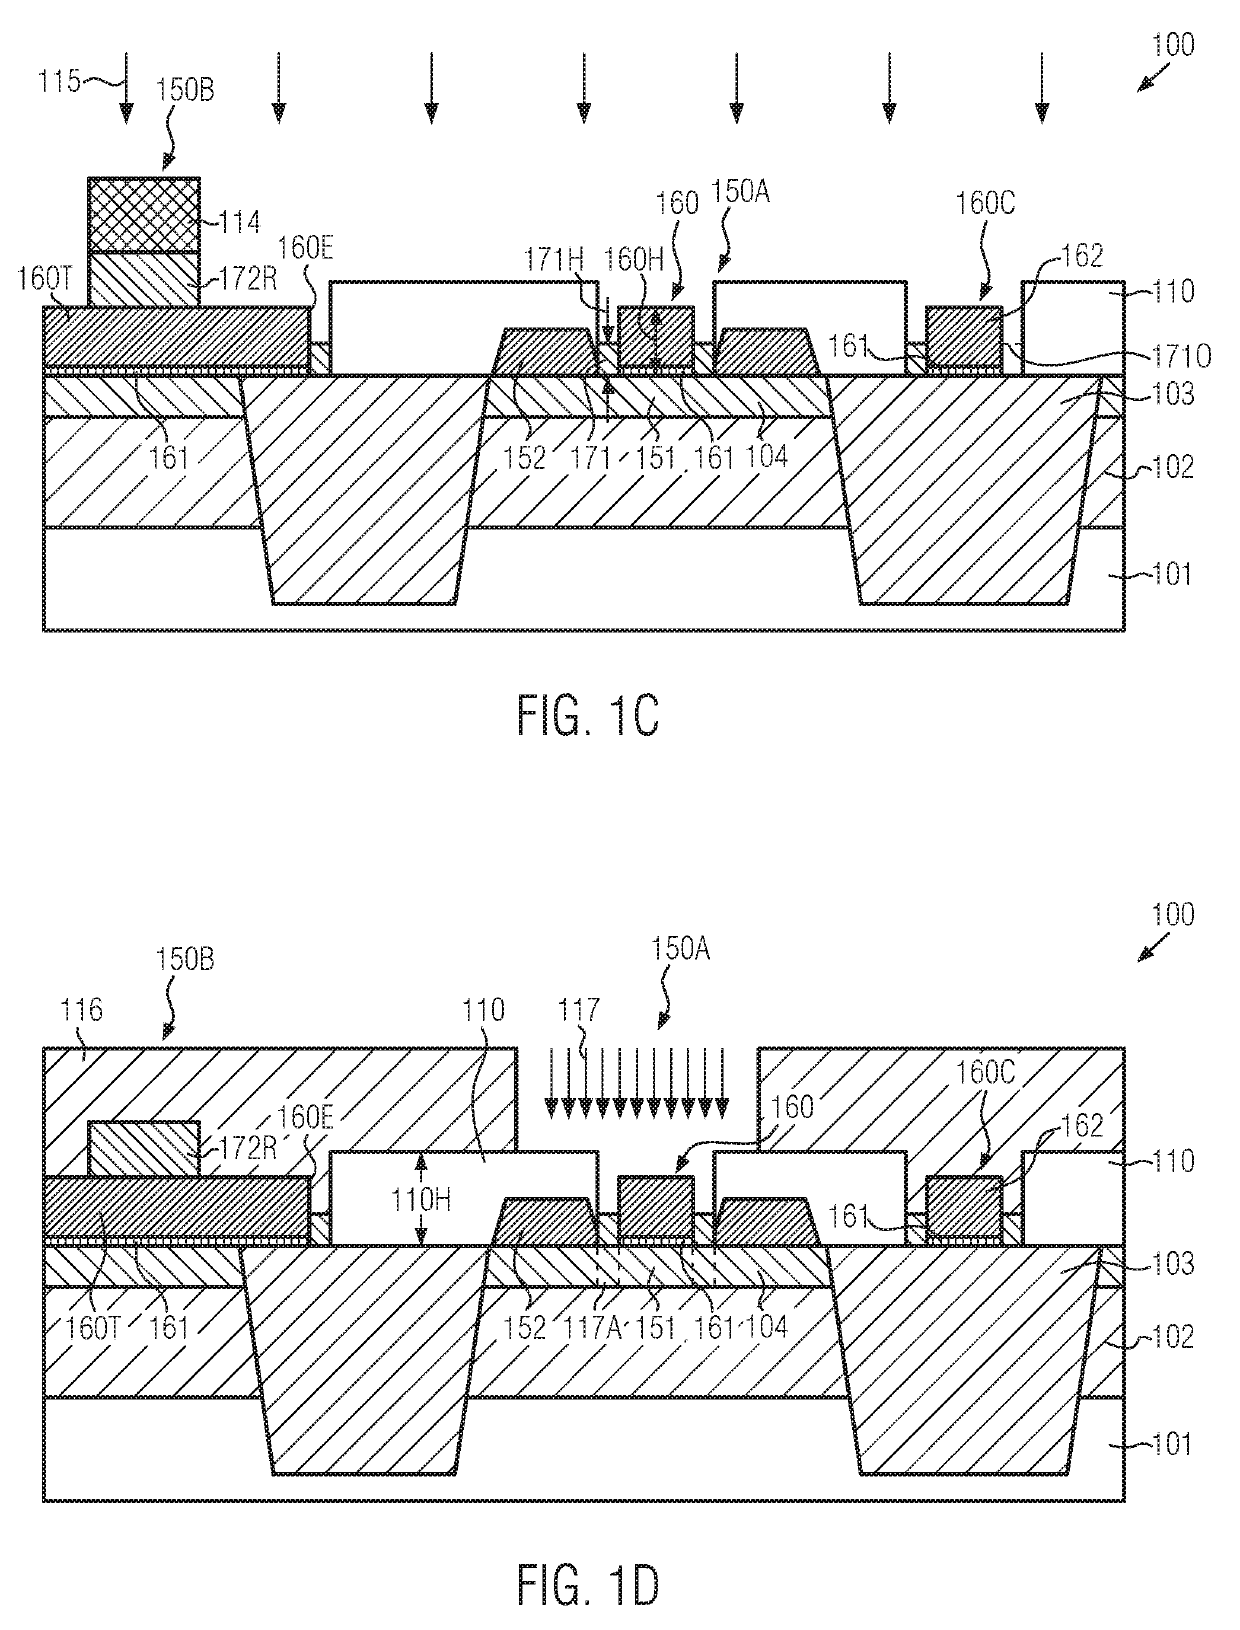 Cap removal for gate electrode structures with reduced complexity